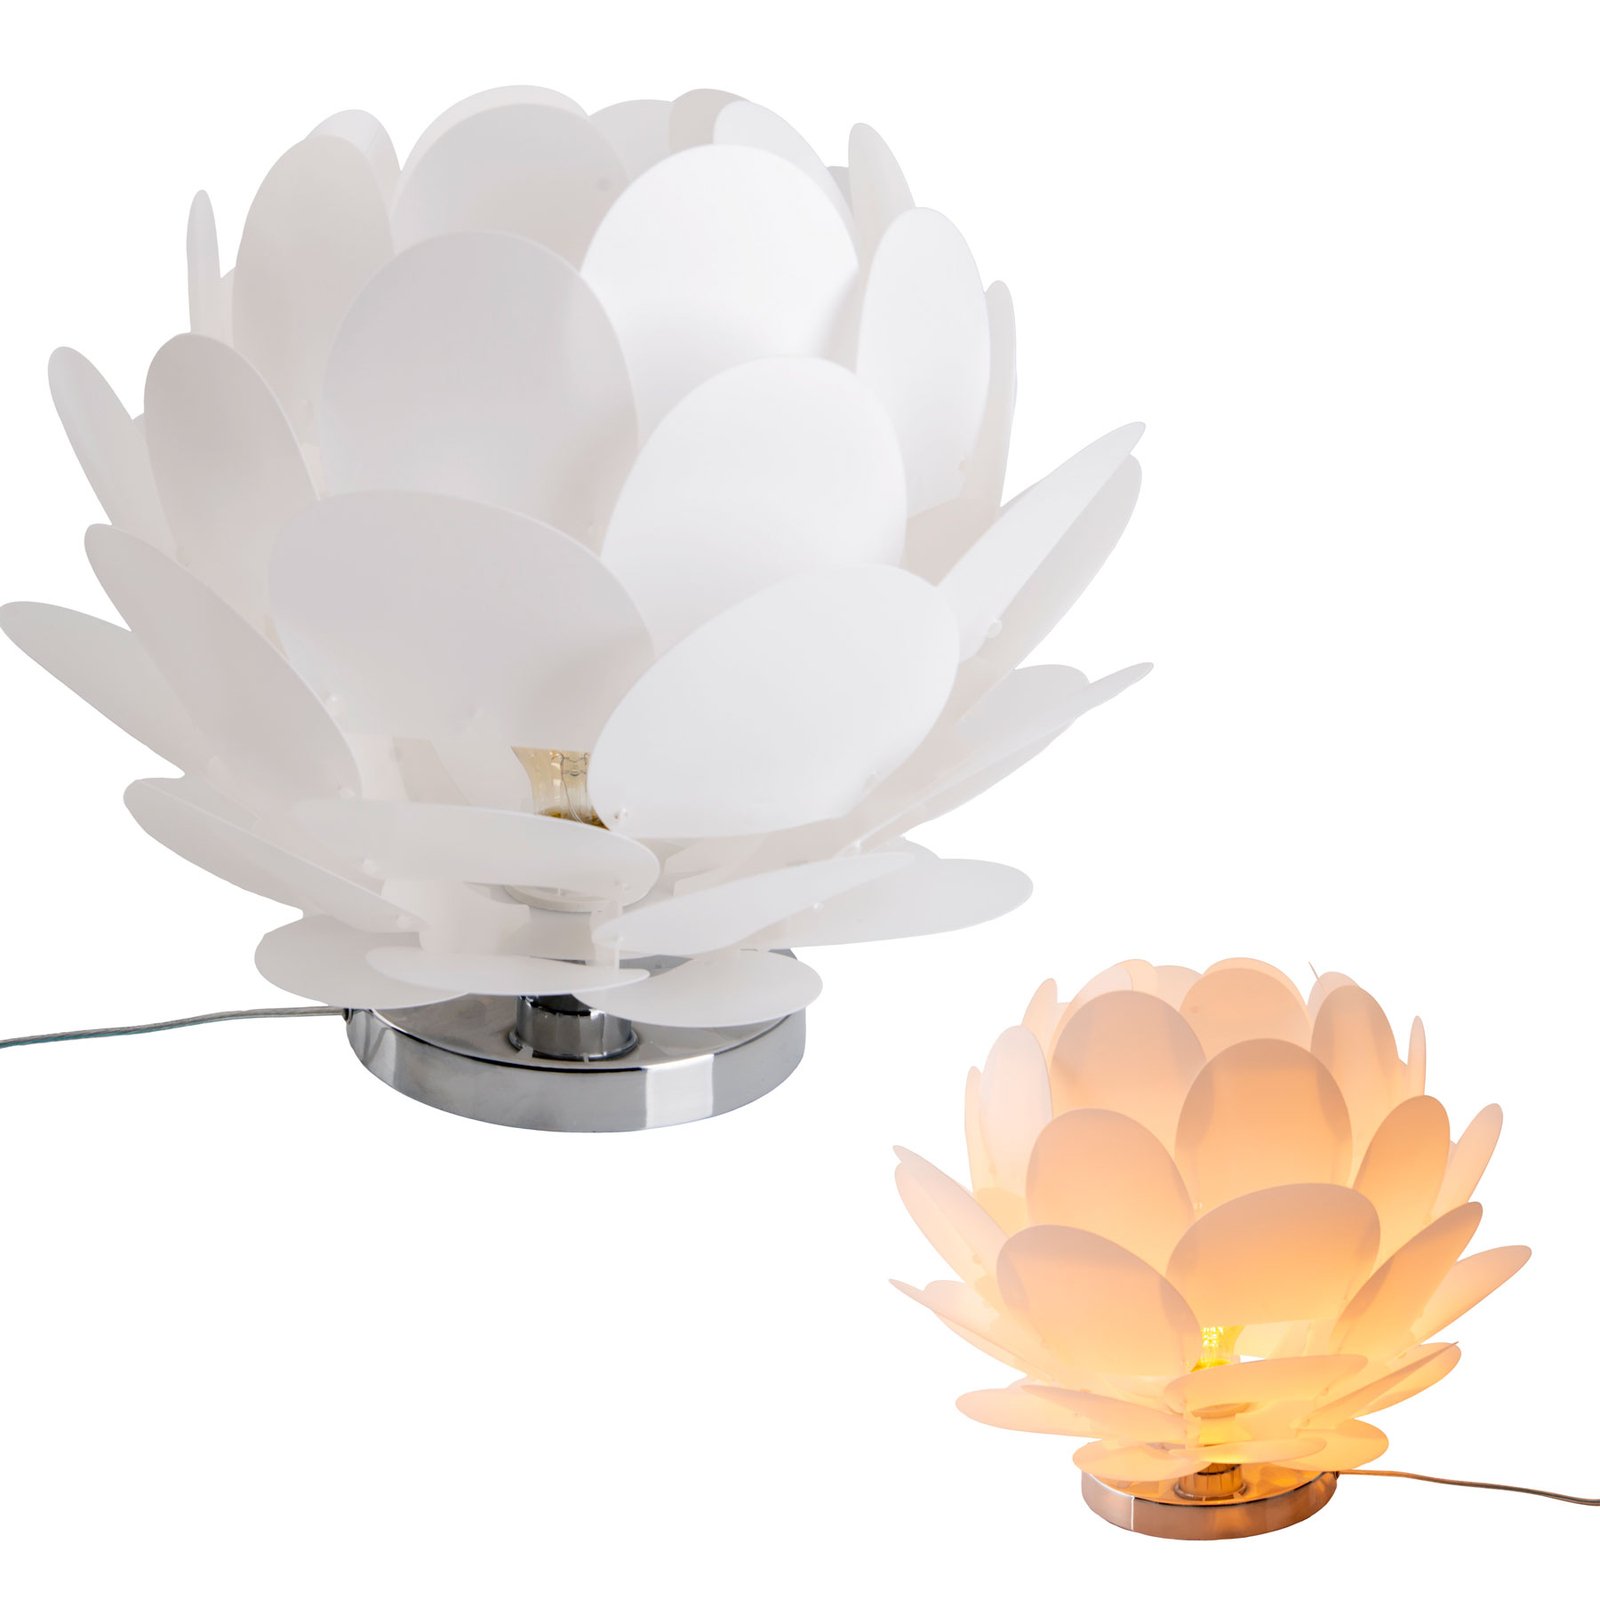 Fora table lamp in a flower shape, white